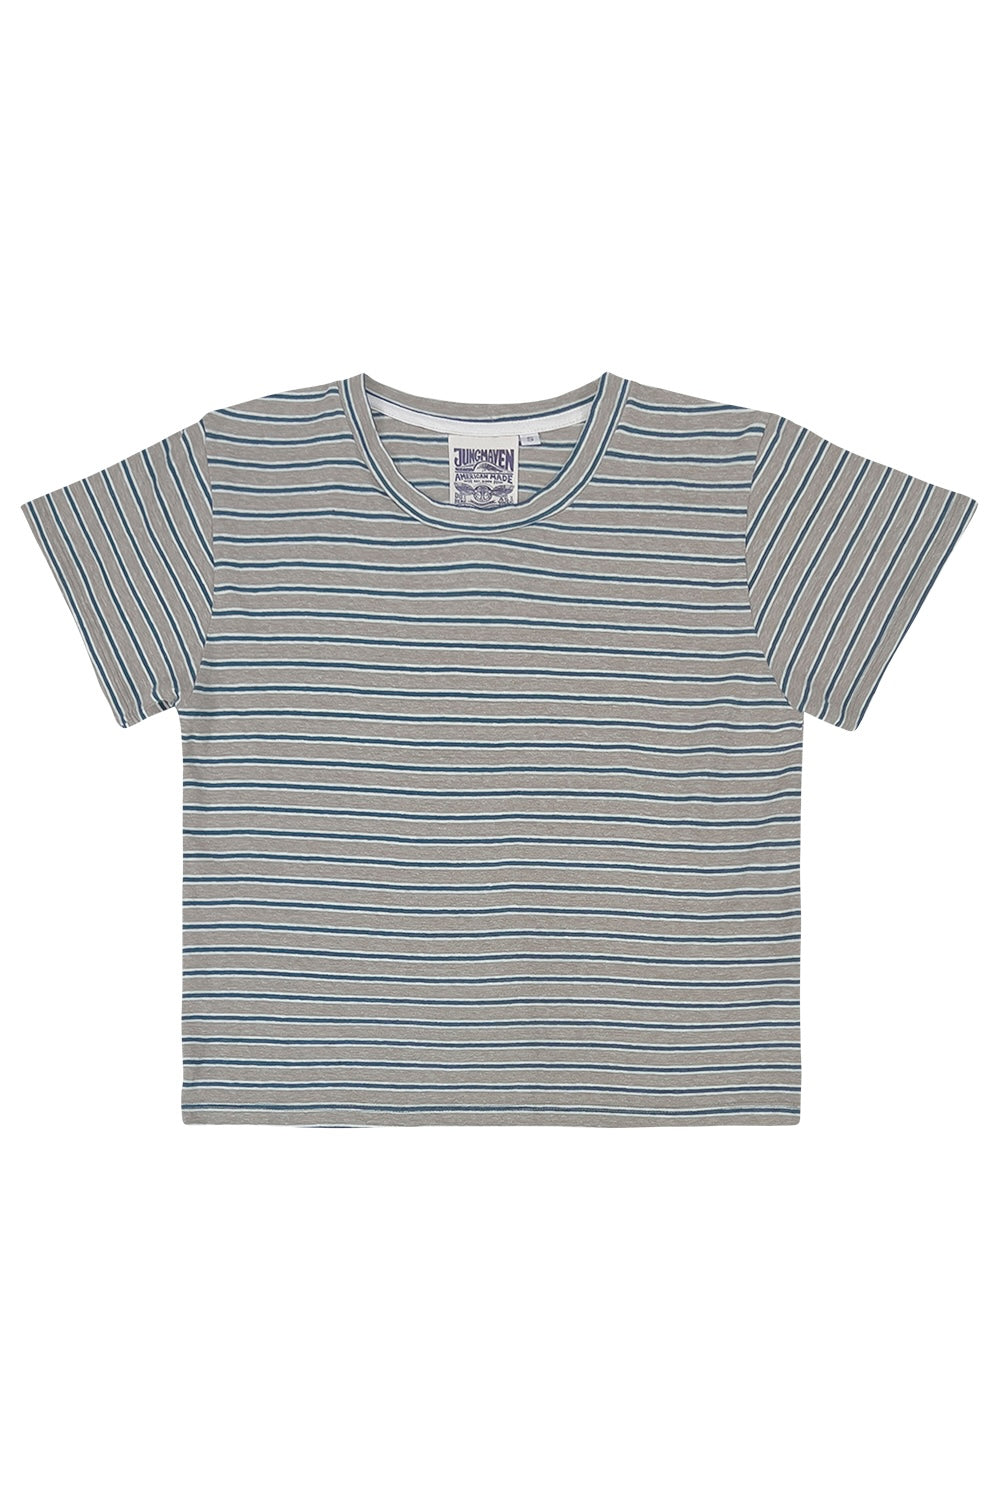 Stripe Cropped Lorel Tee | Jungmaven Hemp Clothing & Accessories / Color: Teal/White/Gray Stripe